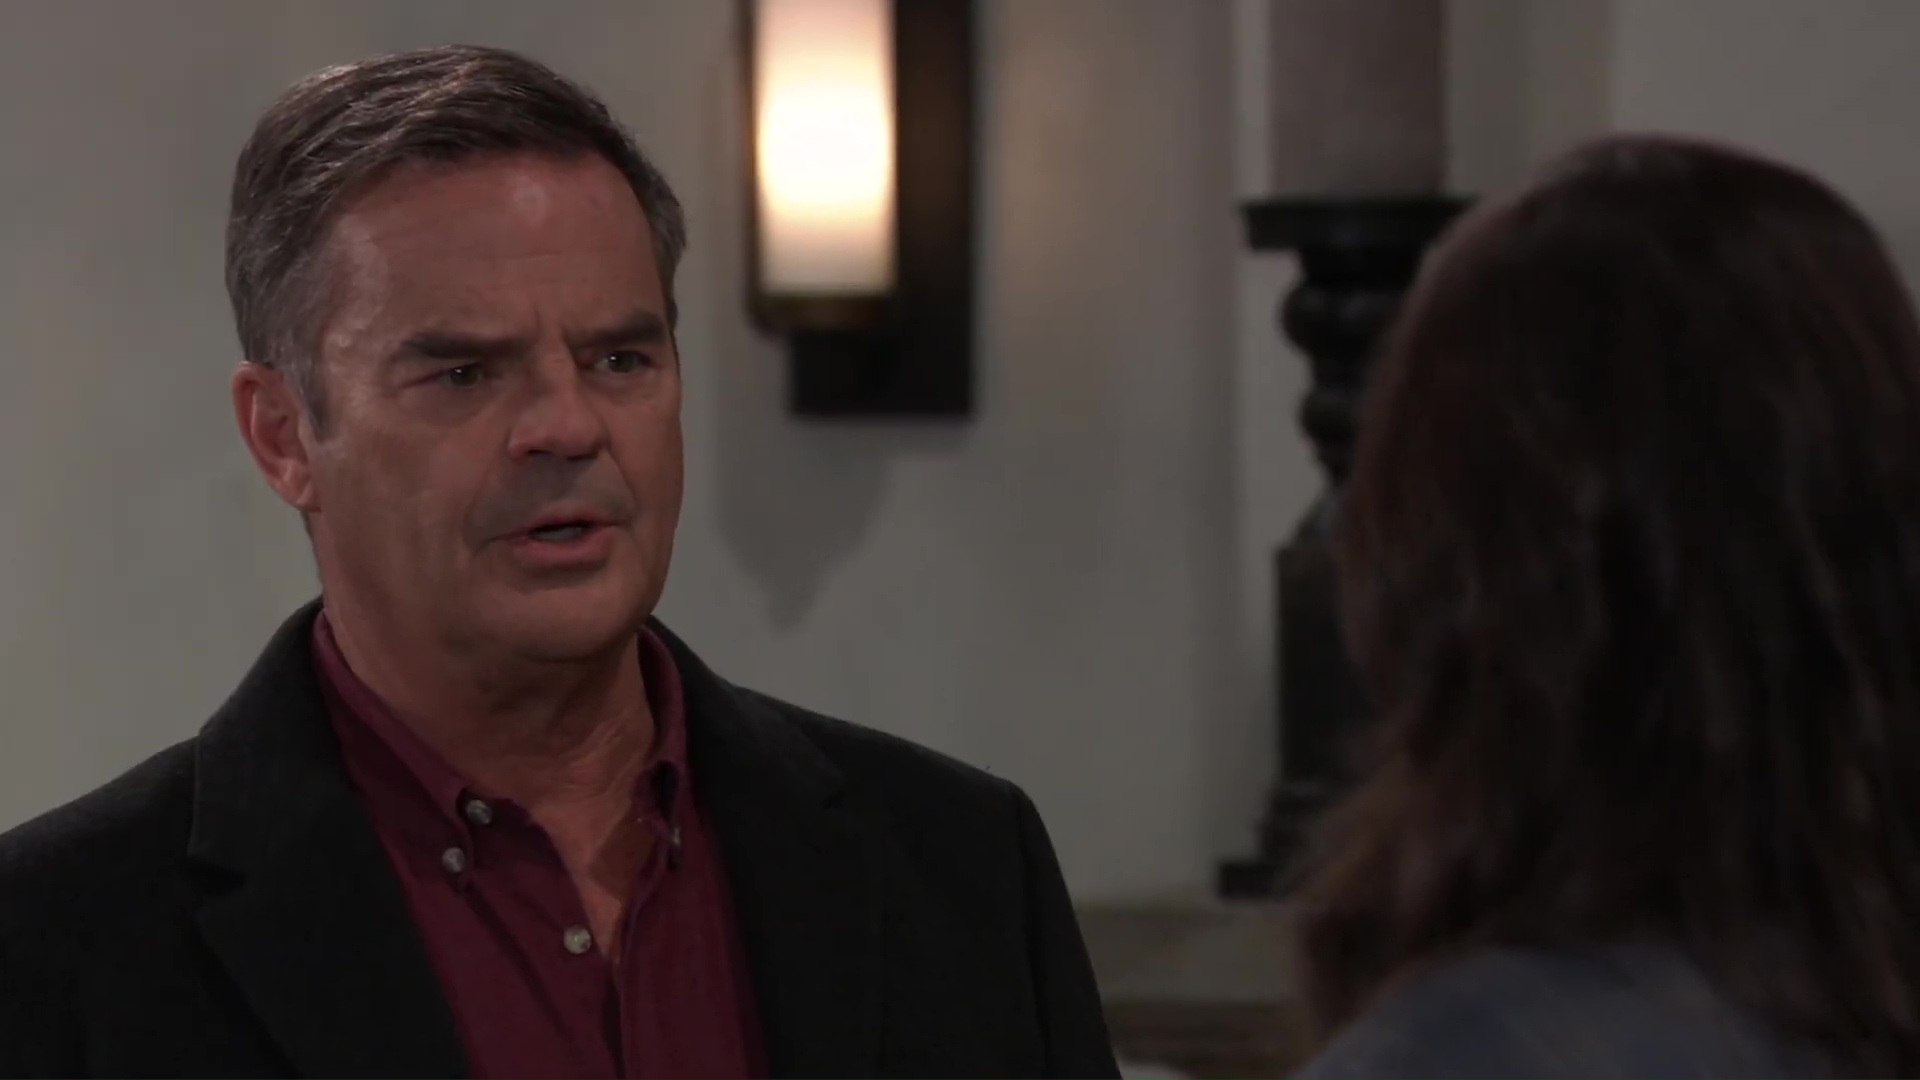 ned asks brook lynn about trouble GH